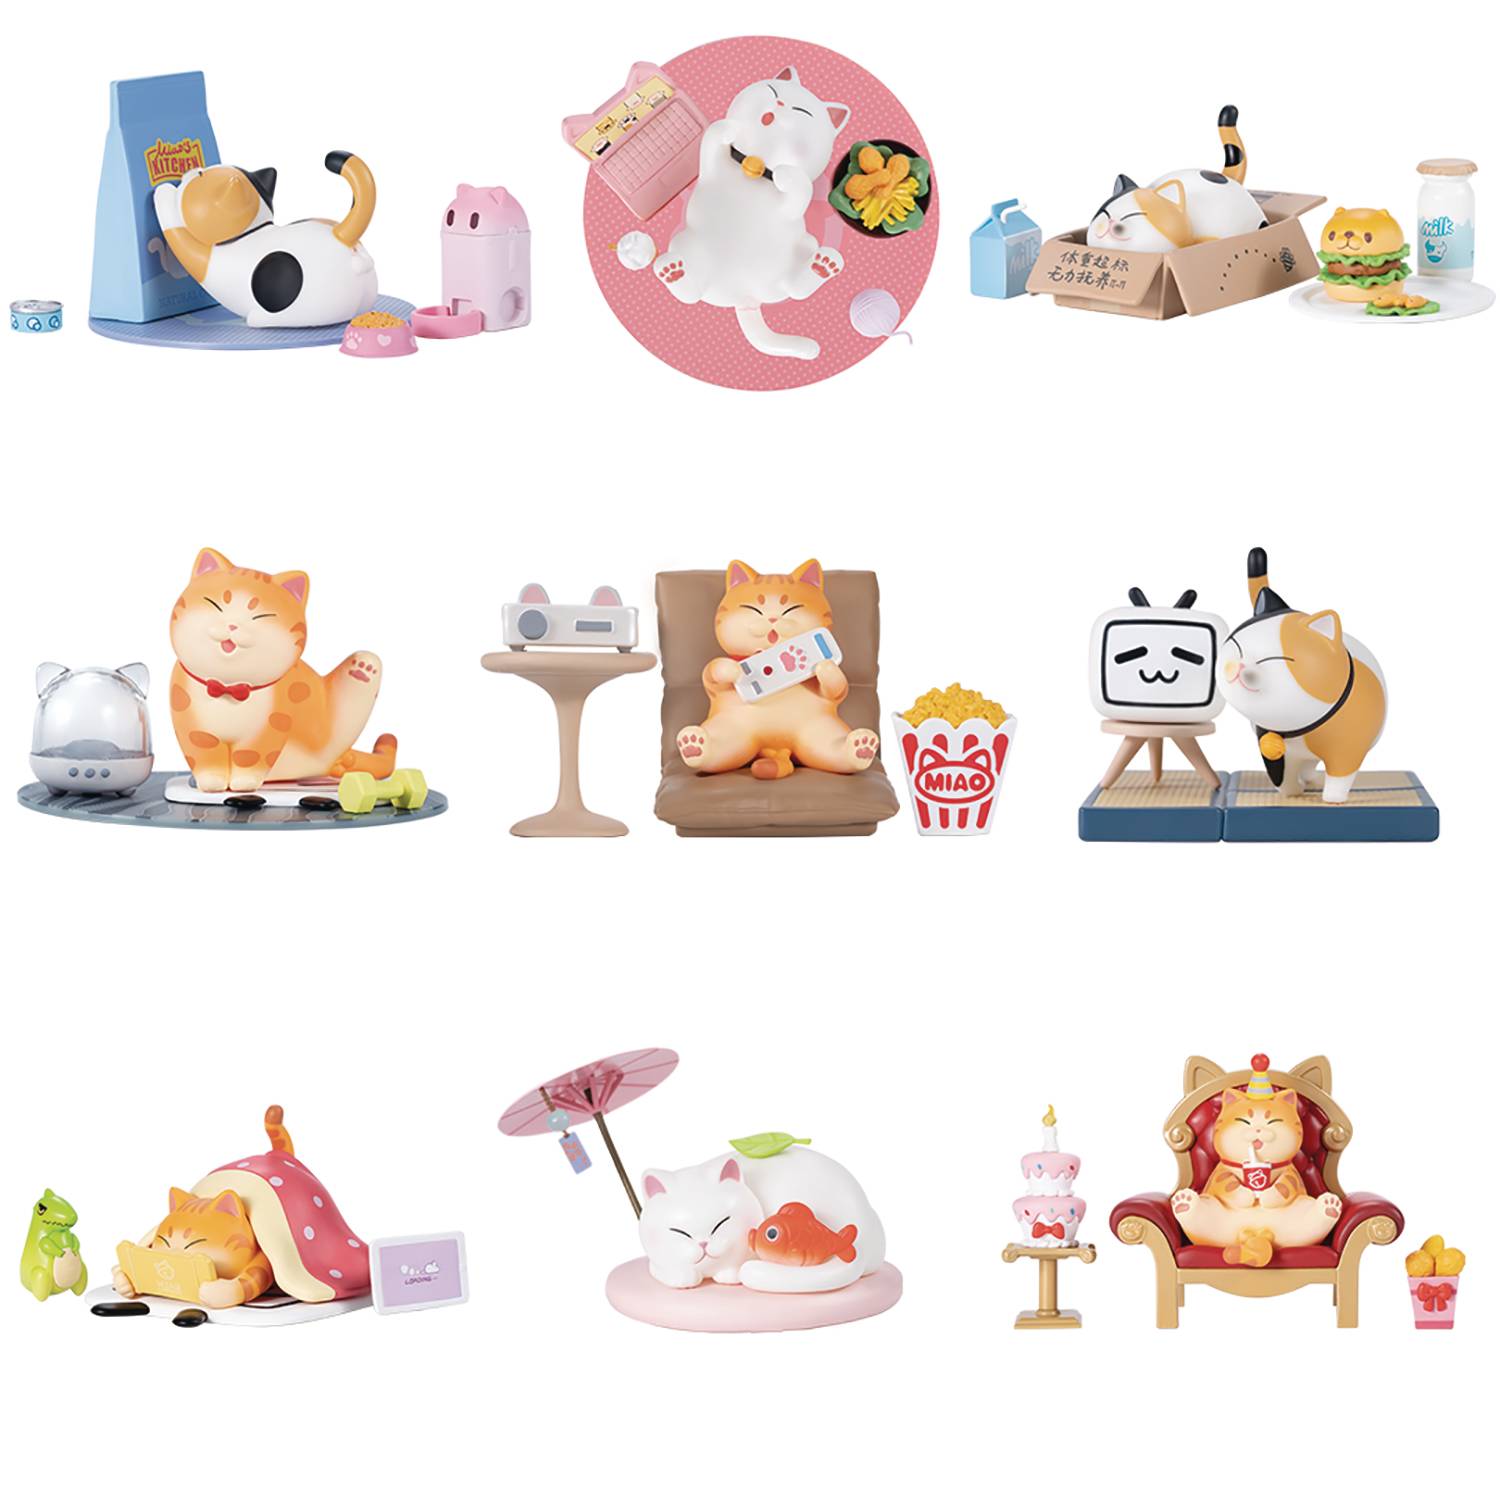 BEEMAI Miao-Ling-Dang Relax Moments Series 1PC Random Design Cute Figures  Collectible Toys Birthday Gifts